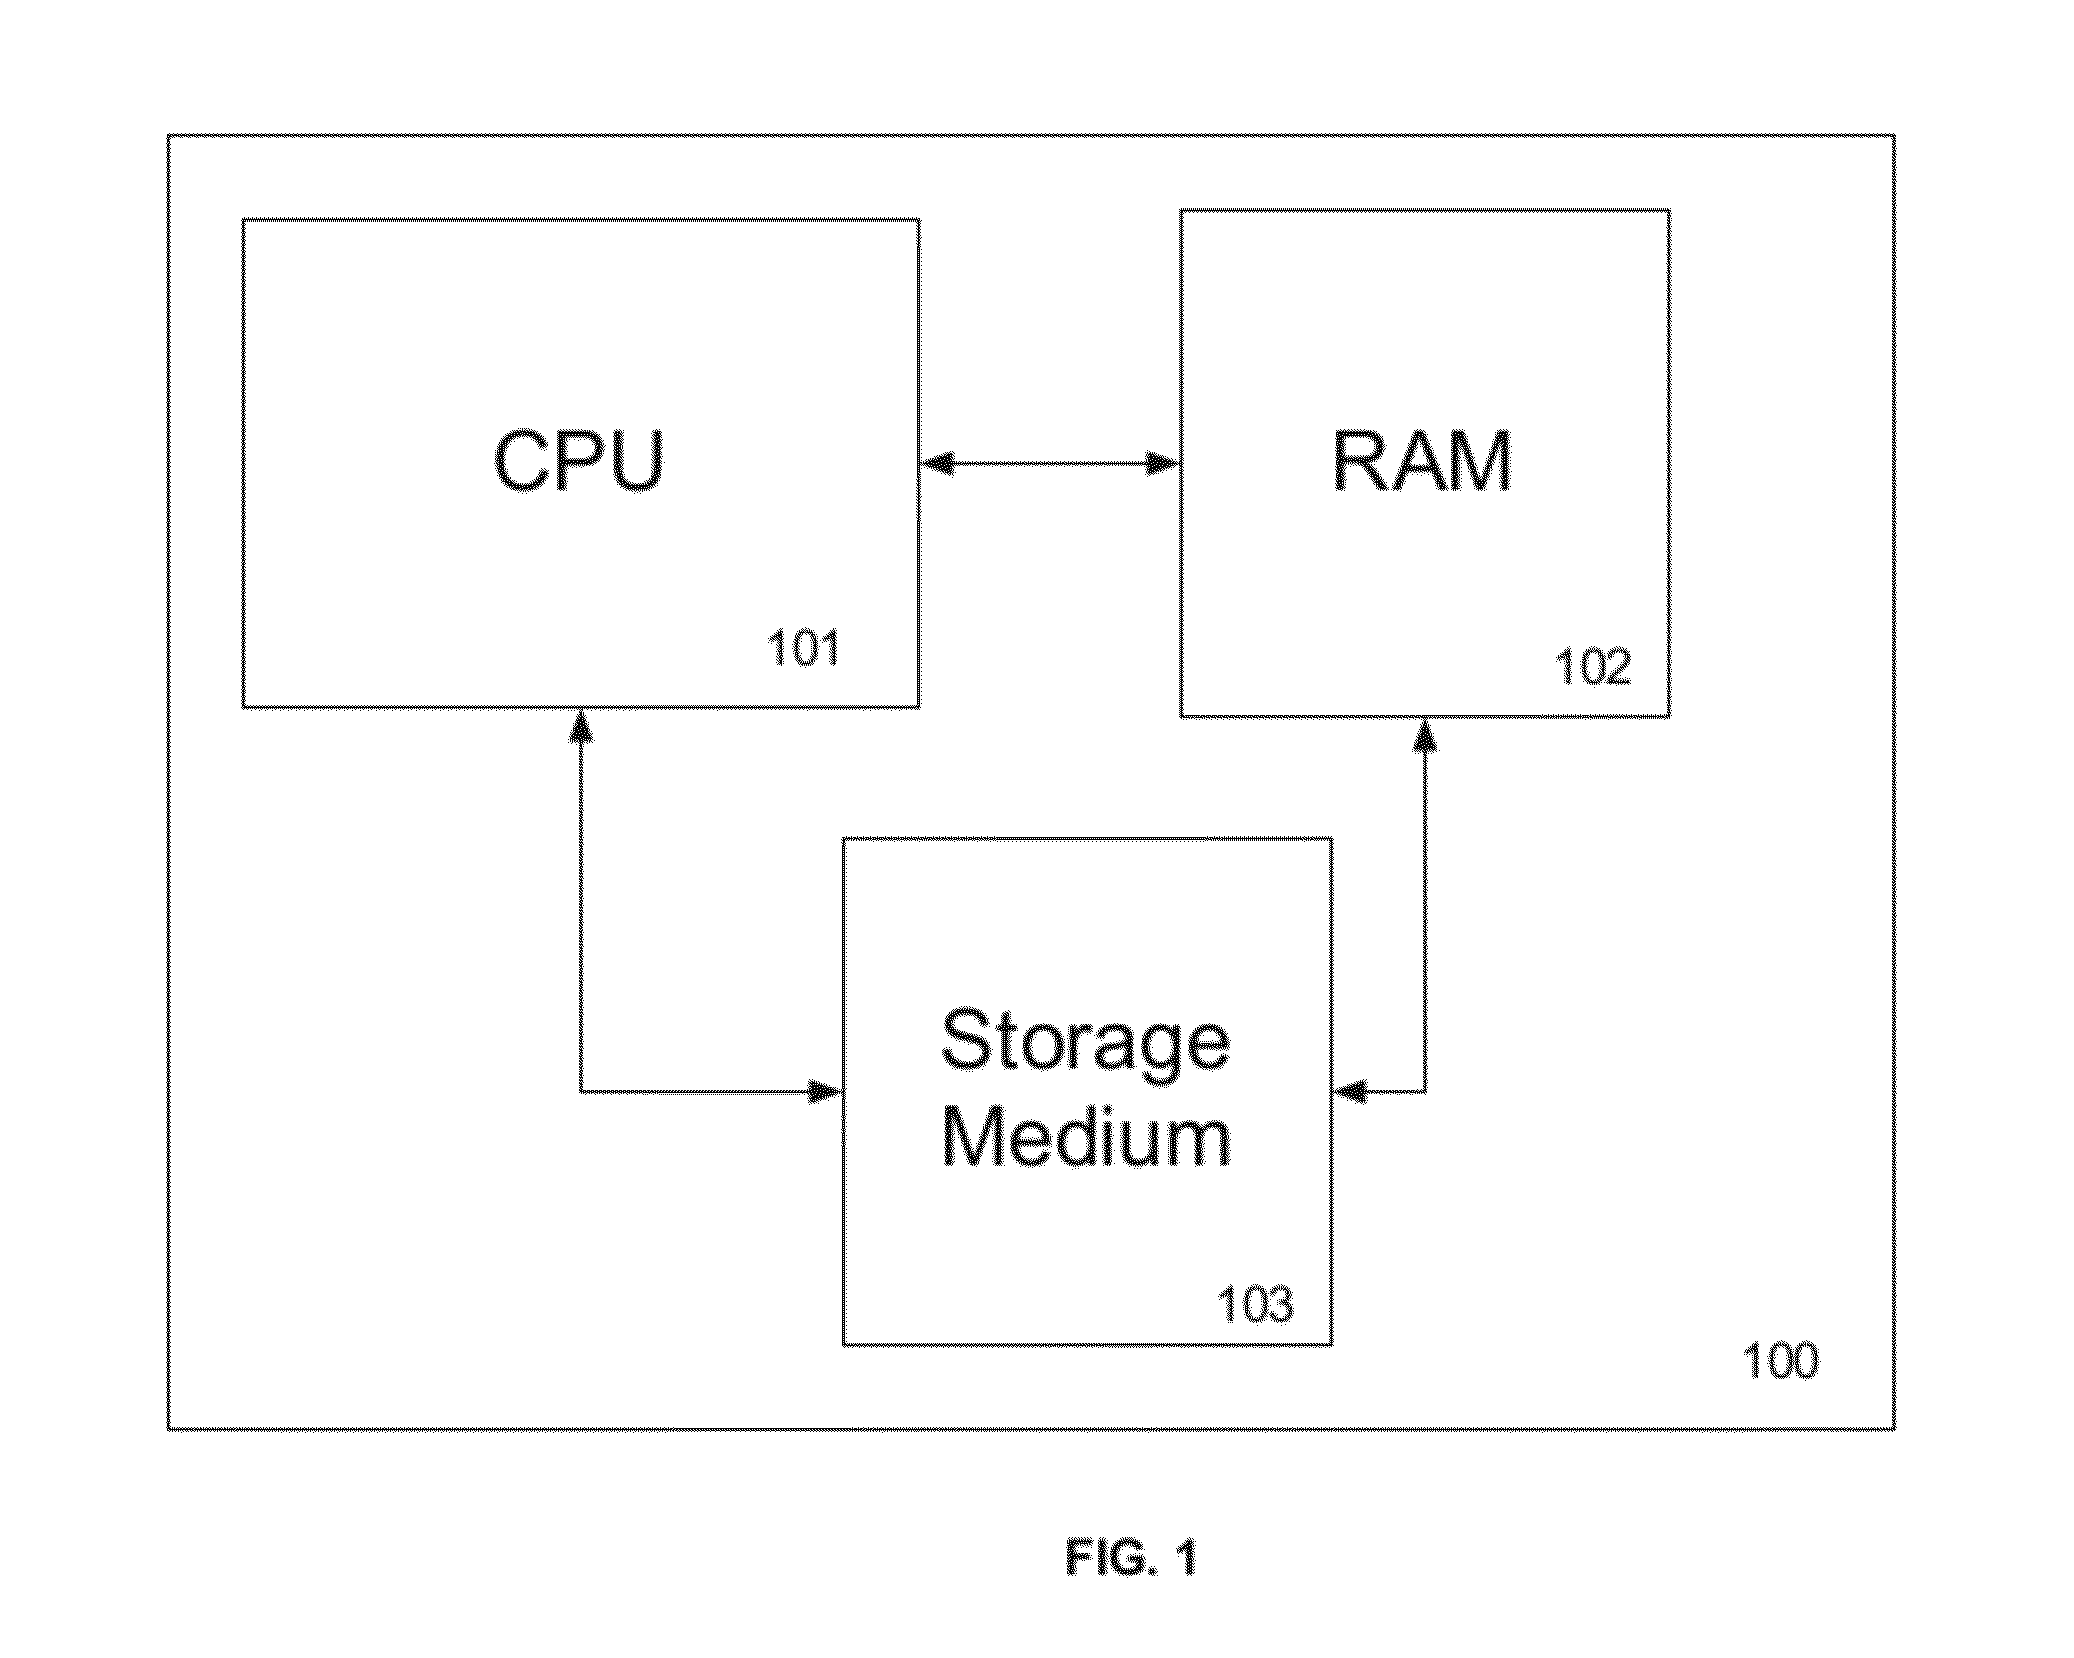 System and method for facilitating connections and compliance involving service providers in the securities industry